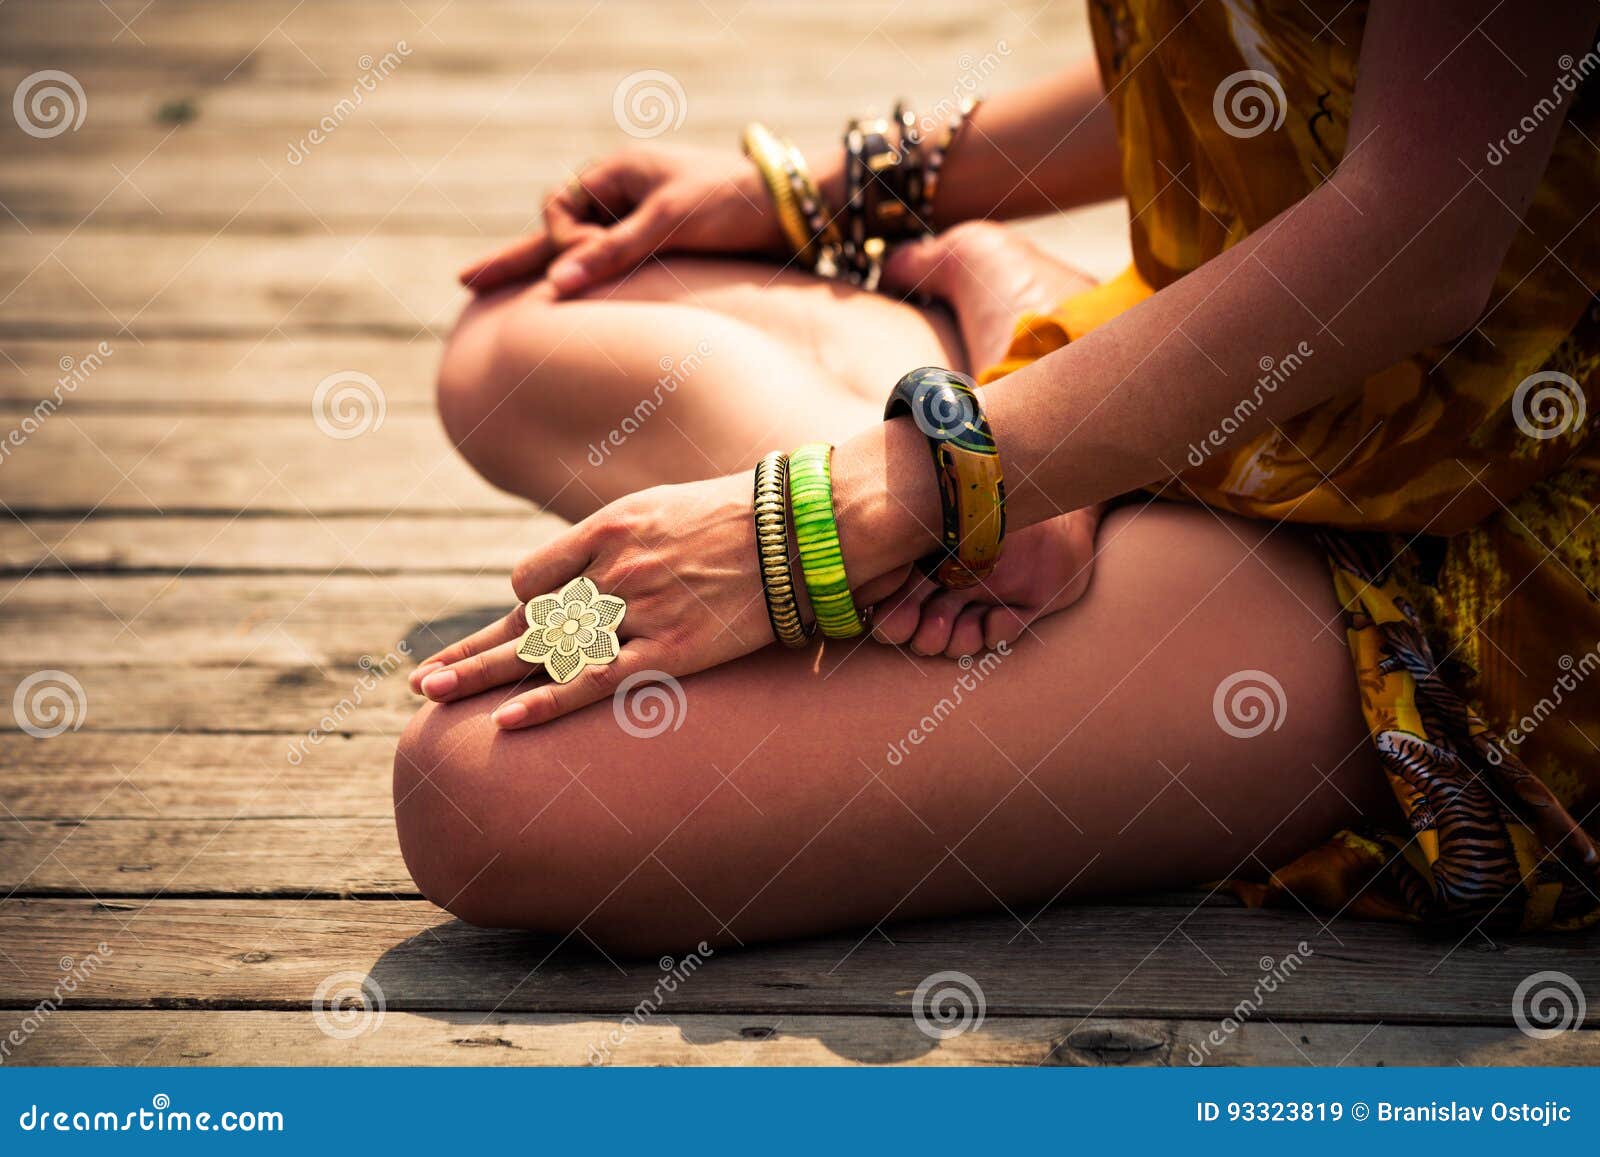 woman in a meditative yoga position outdoor lower body